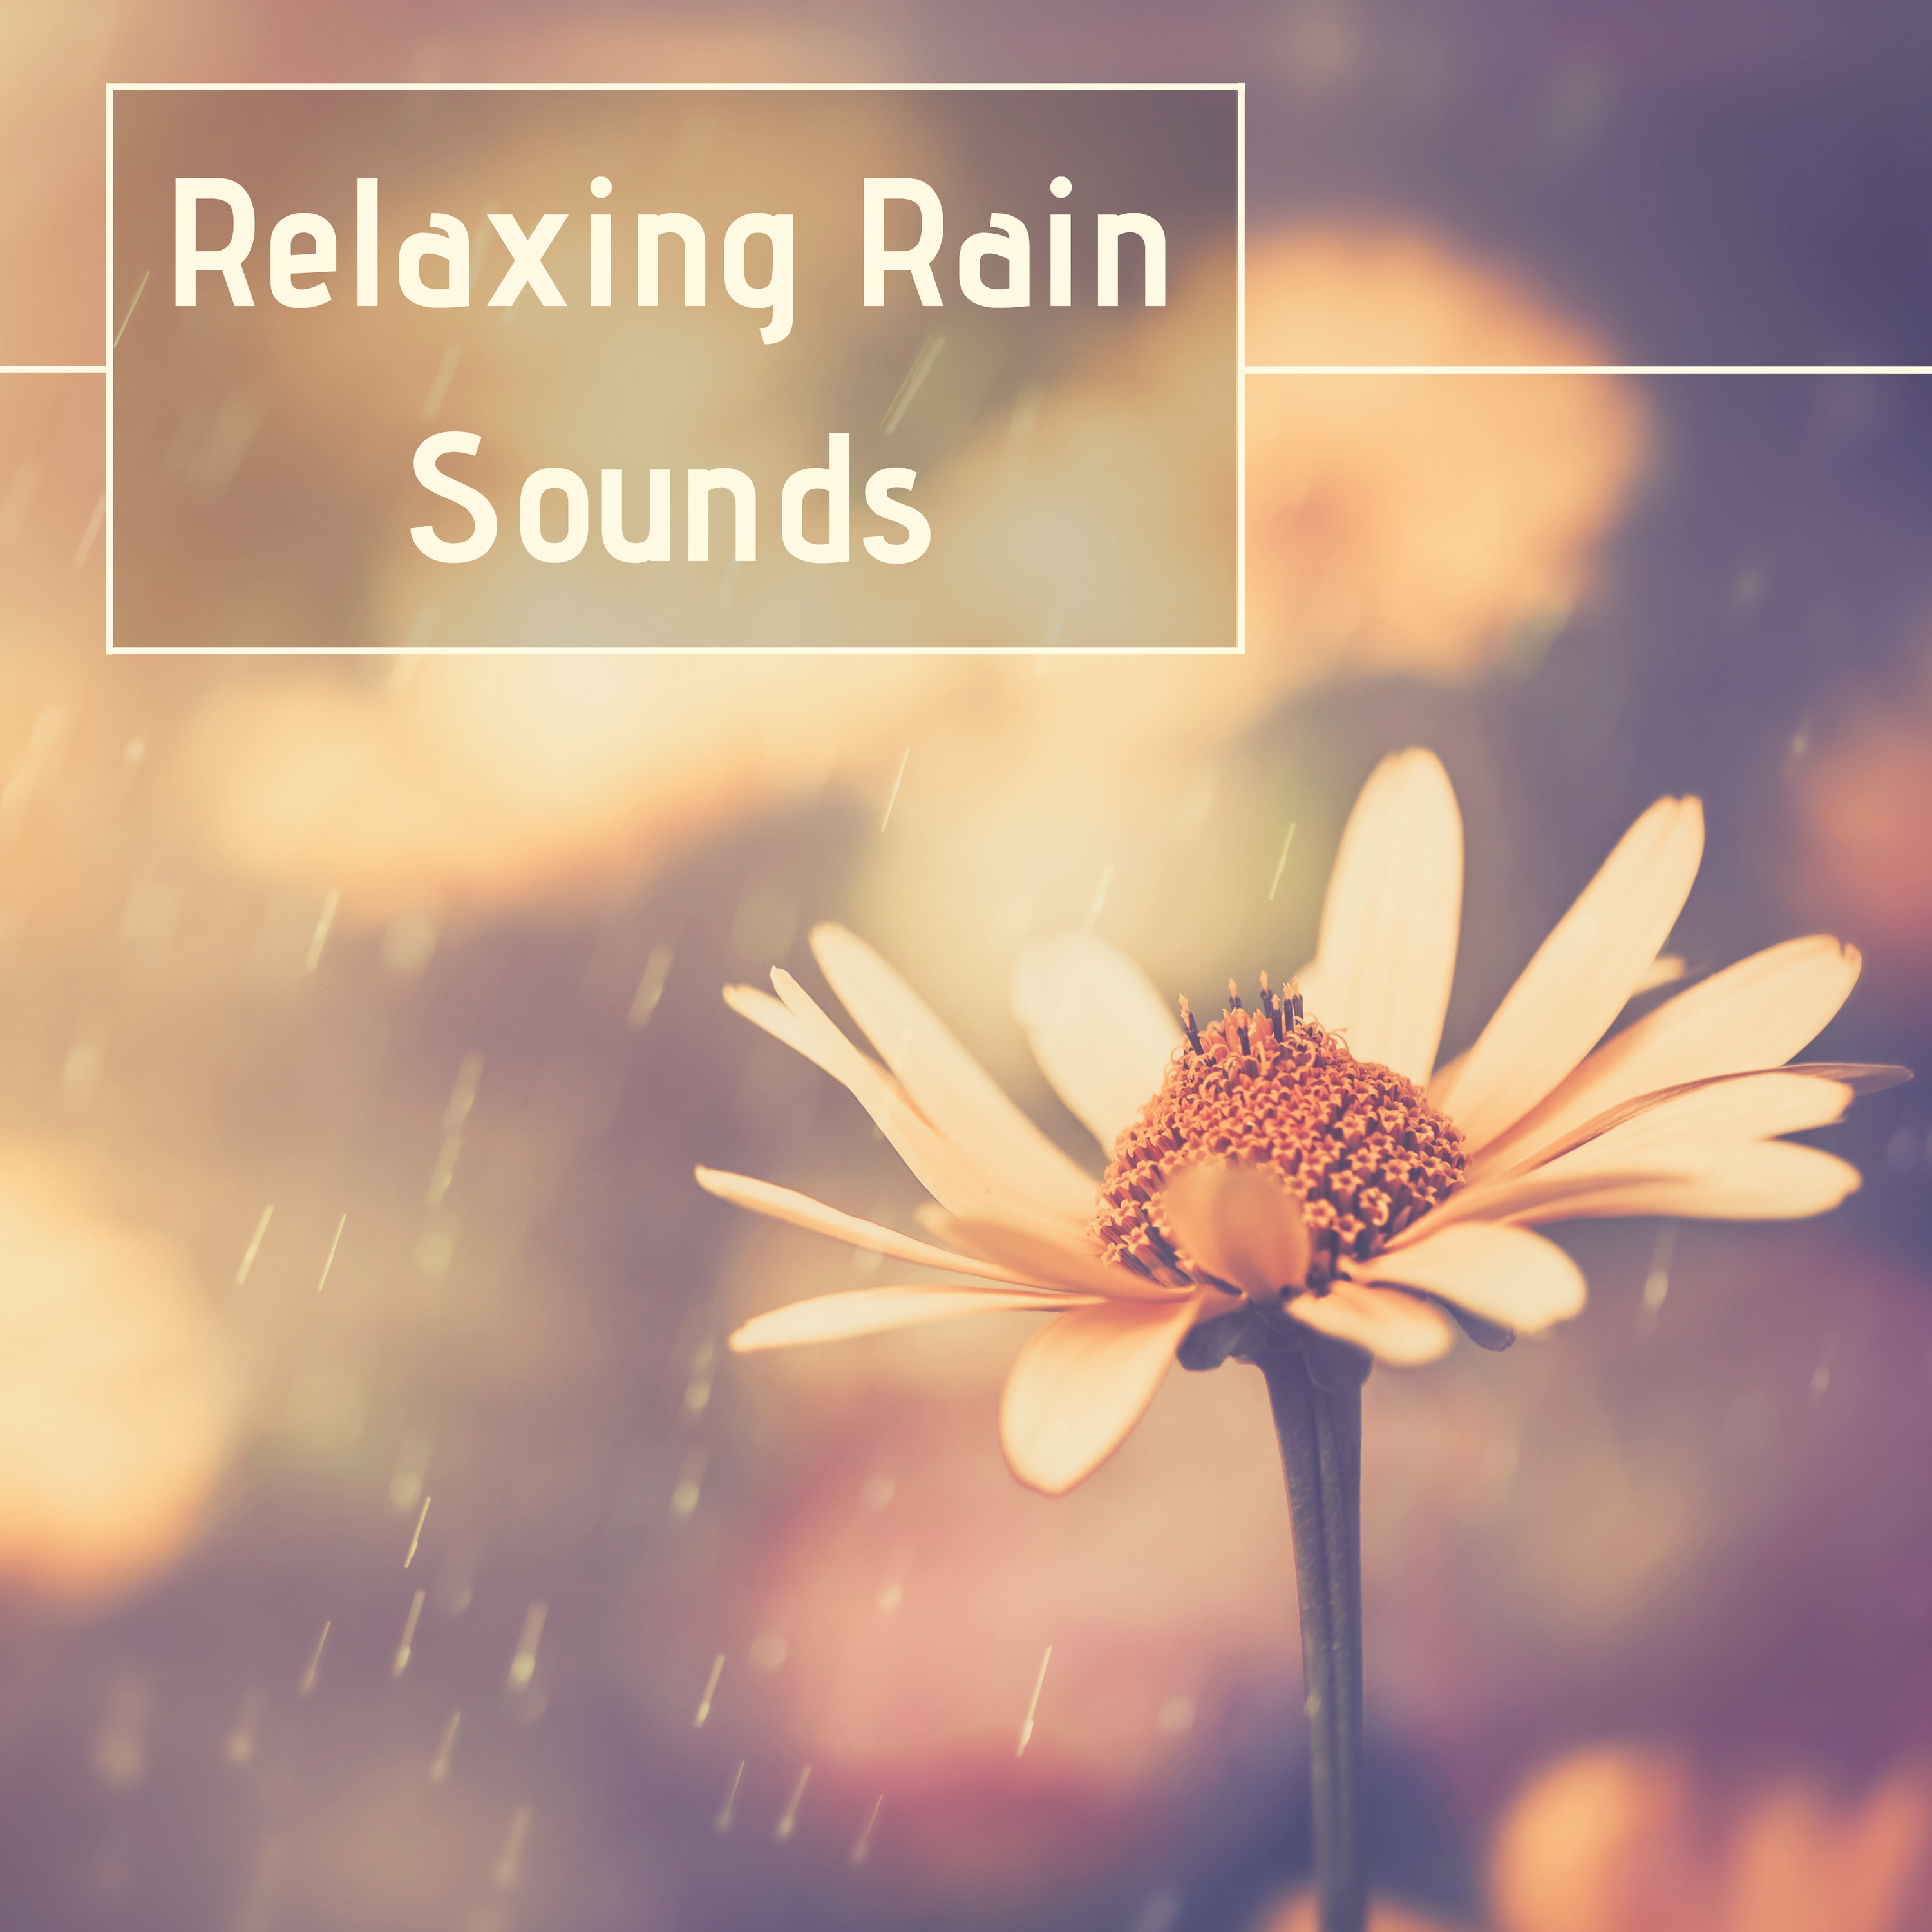 Relaxing Rain Sounds - Best Selection of Gentle Rain Sounds Help You to Relax, Meditate, Sleep